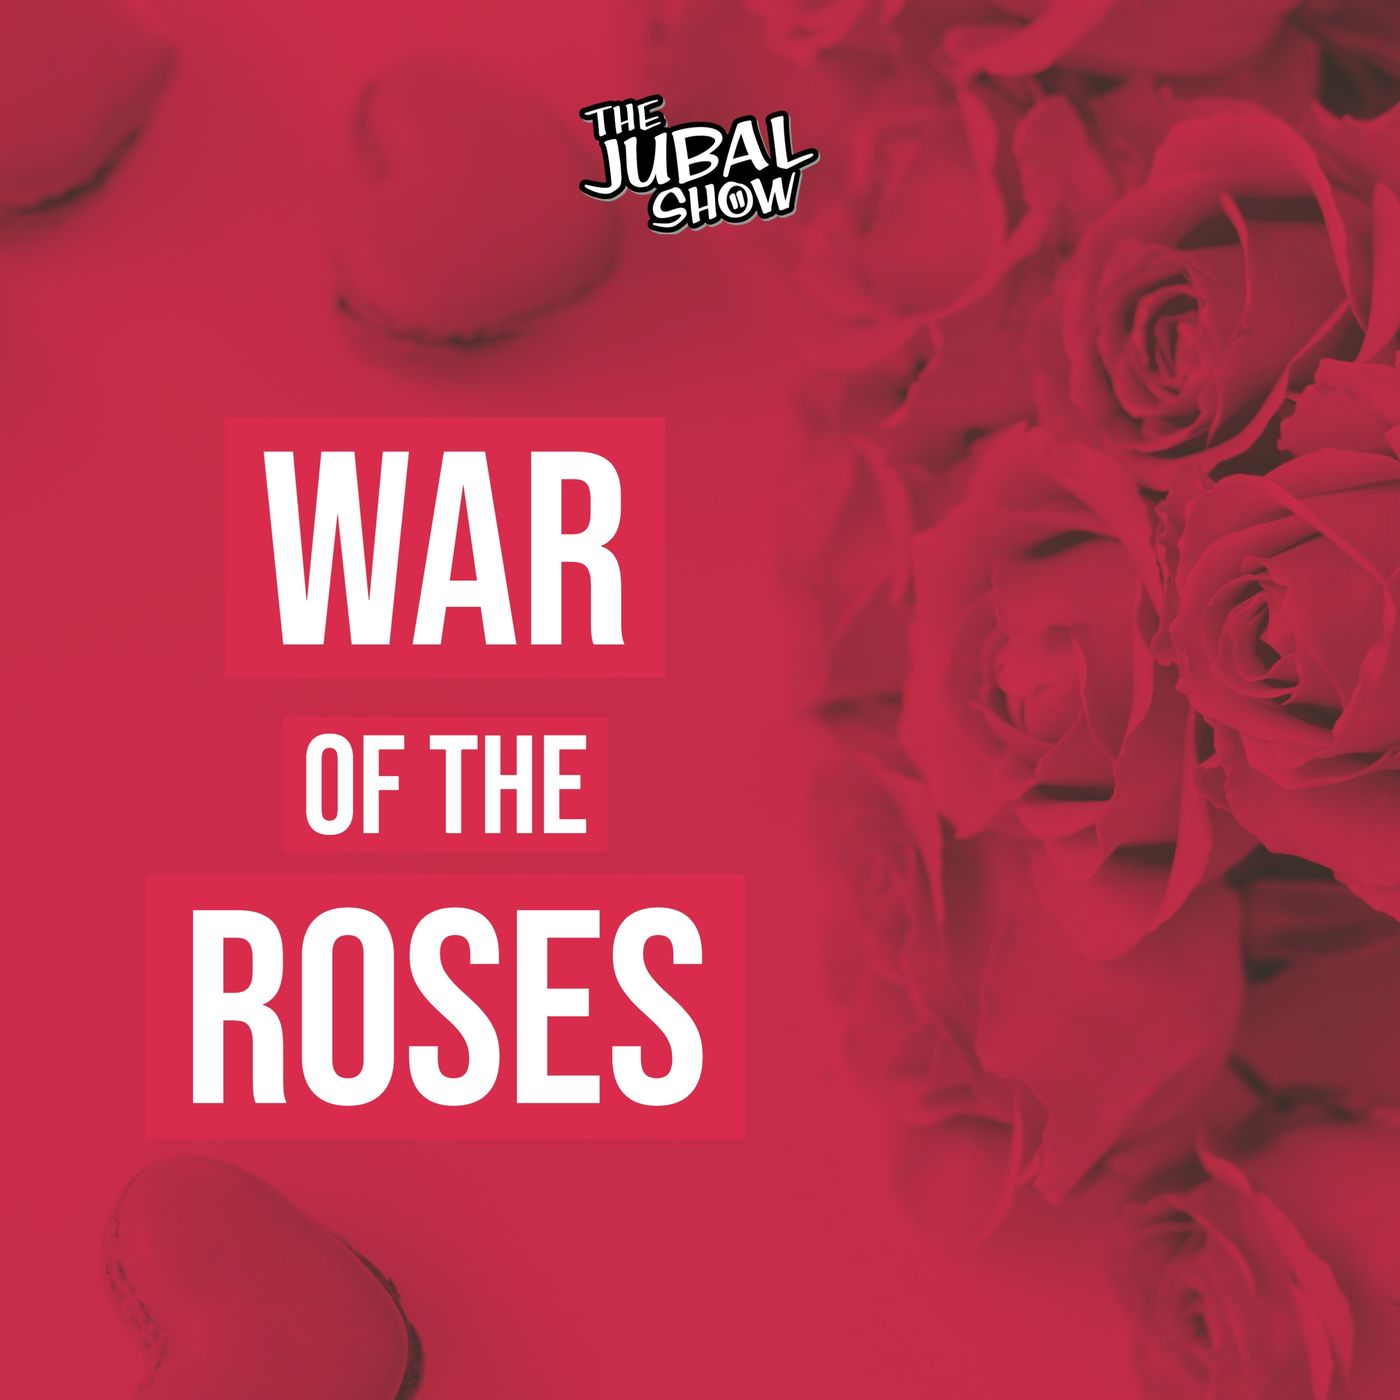 The Jubal Show goes Real Housewives of Minor League Softball in this War Of The Roses!